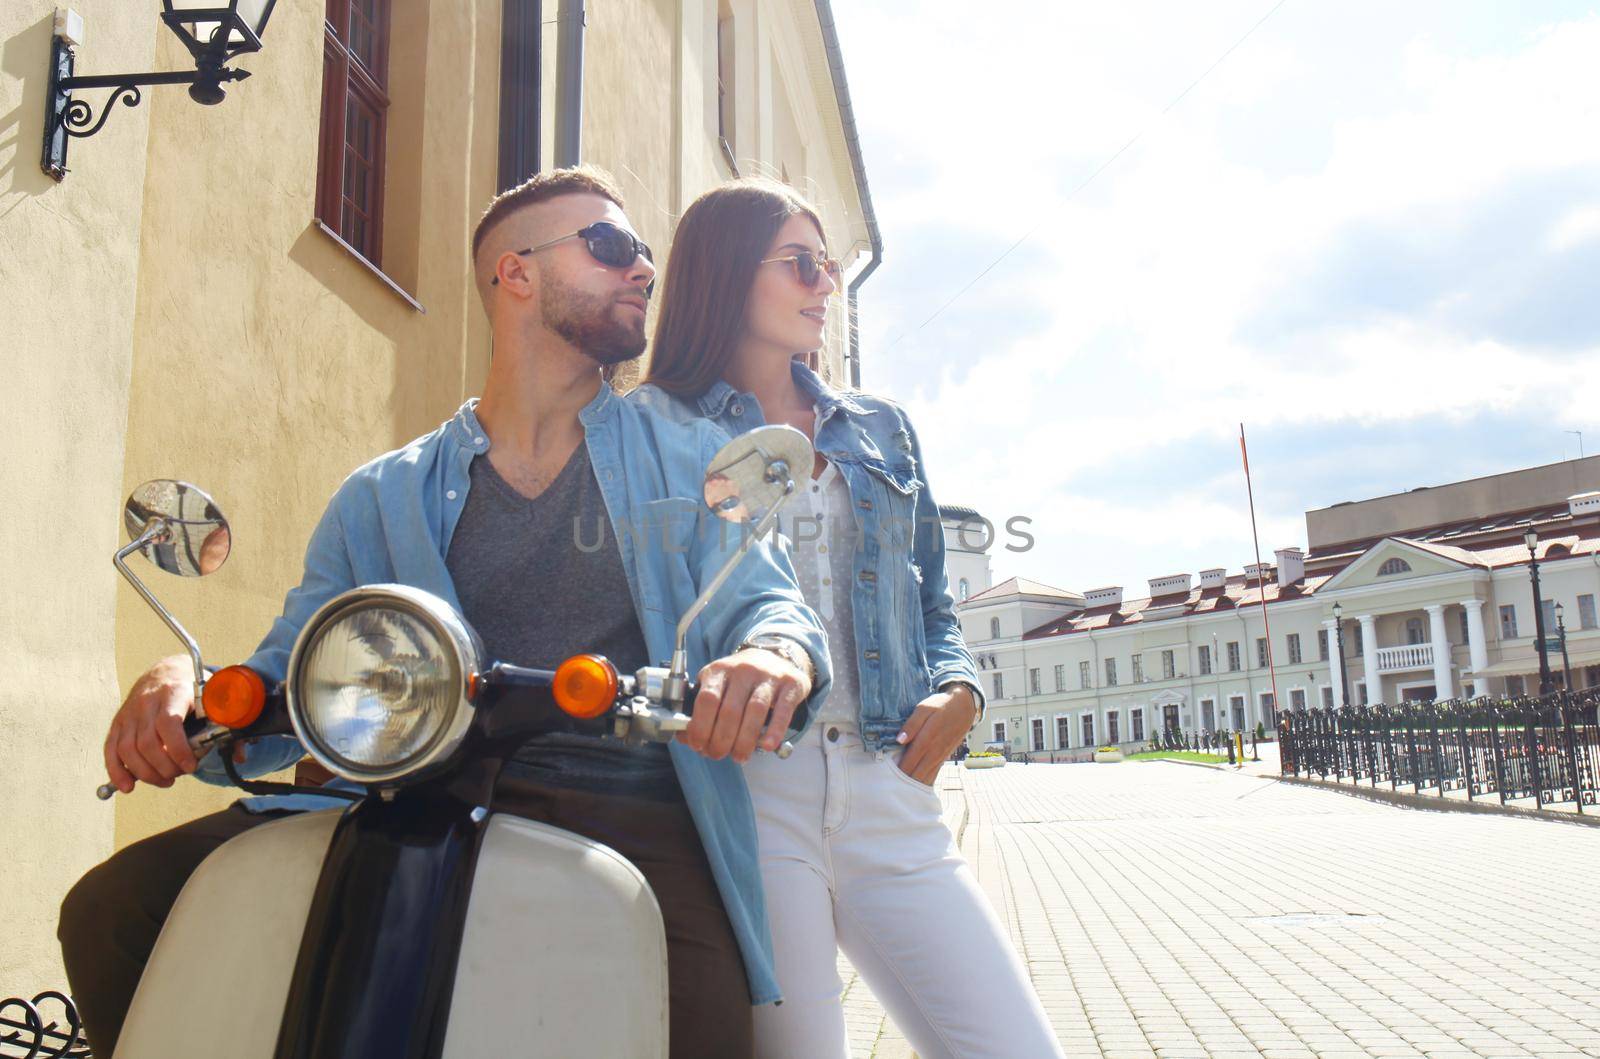 happy young couple riding scooter in town. Handsome guy and young woman travel. Adventure and vacations concept.